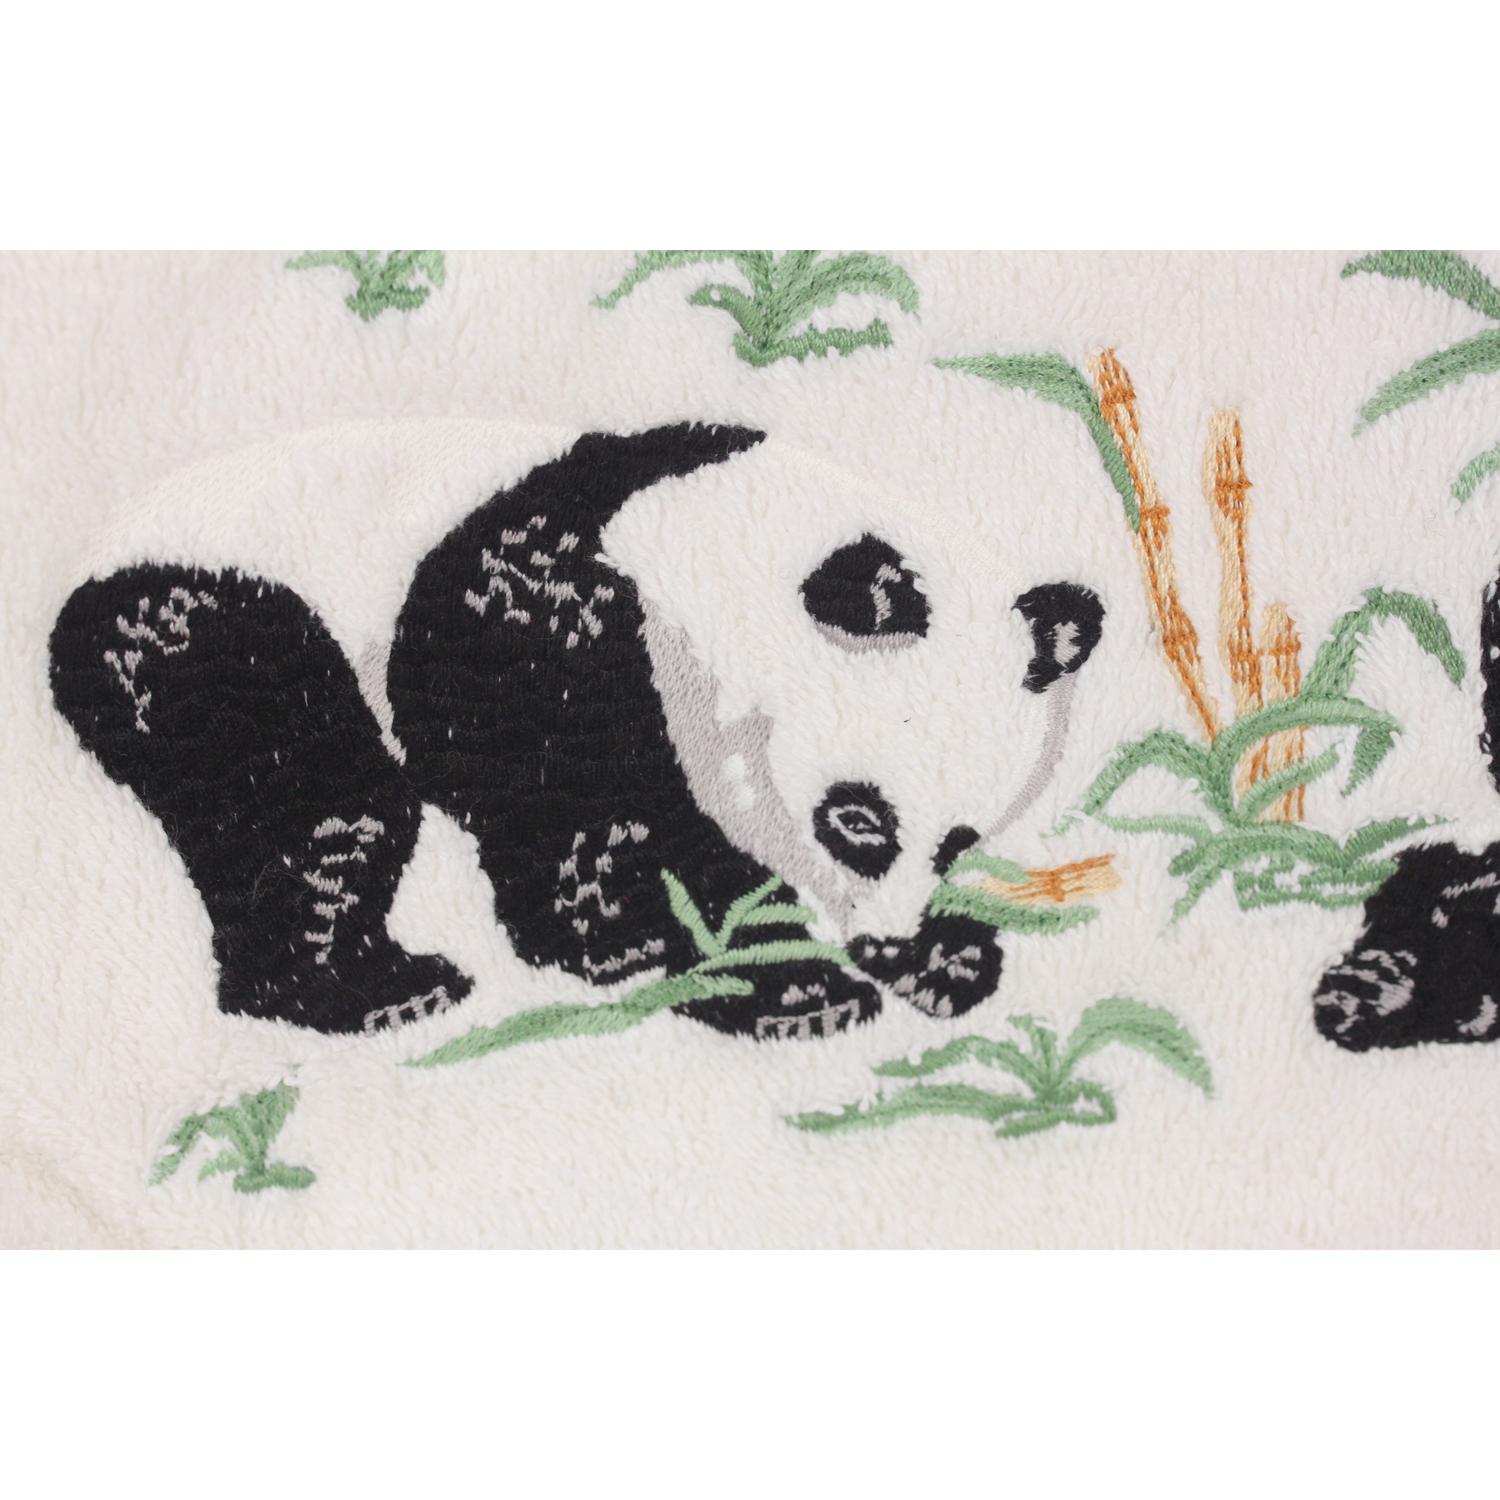 Gray Hermes Paris White Terry Cloth Cotton Cosmetic Bag with Panda